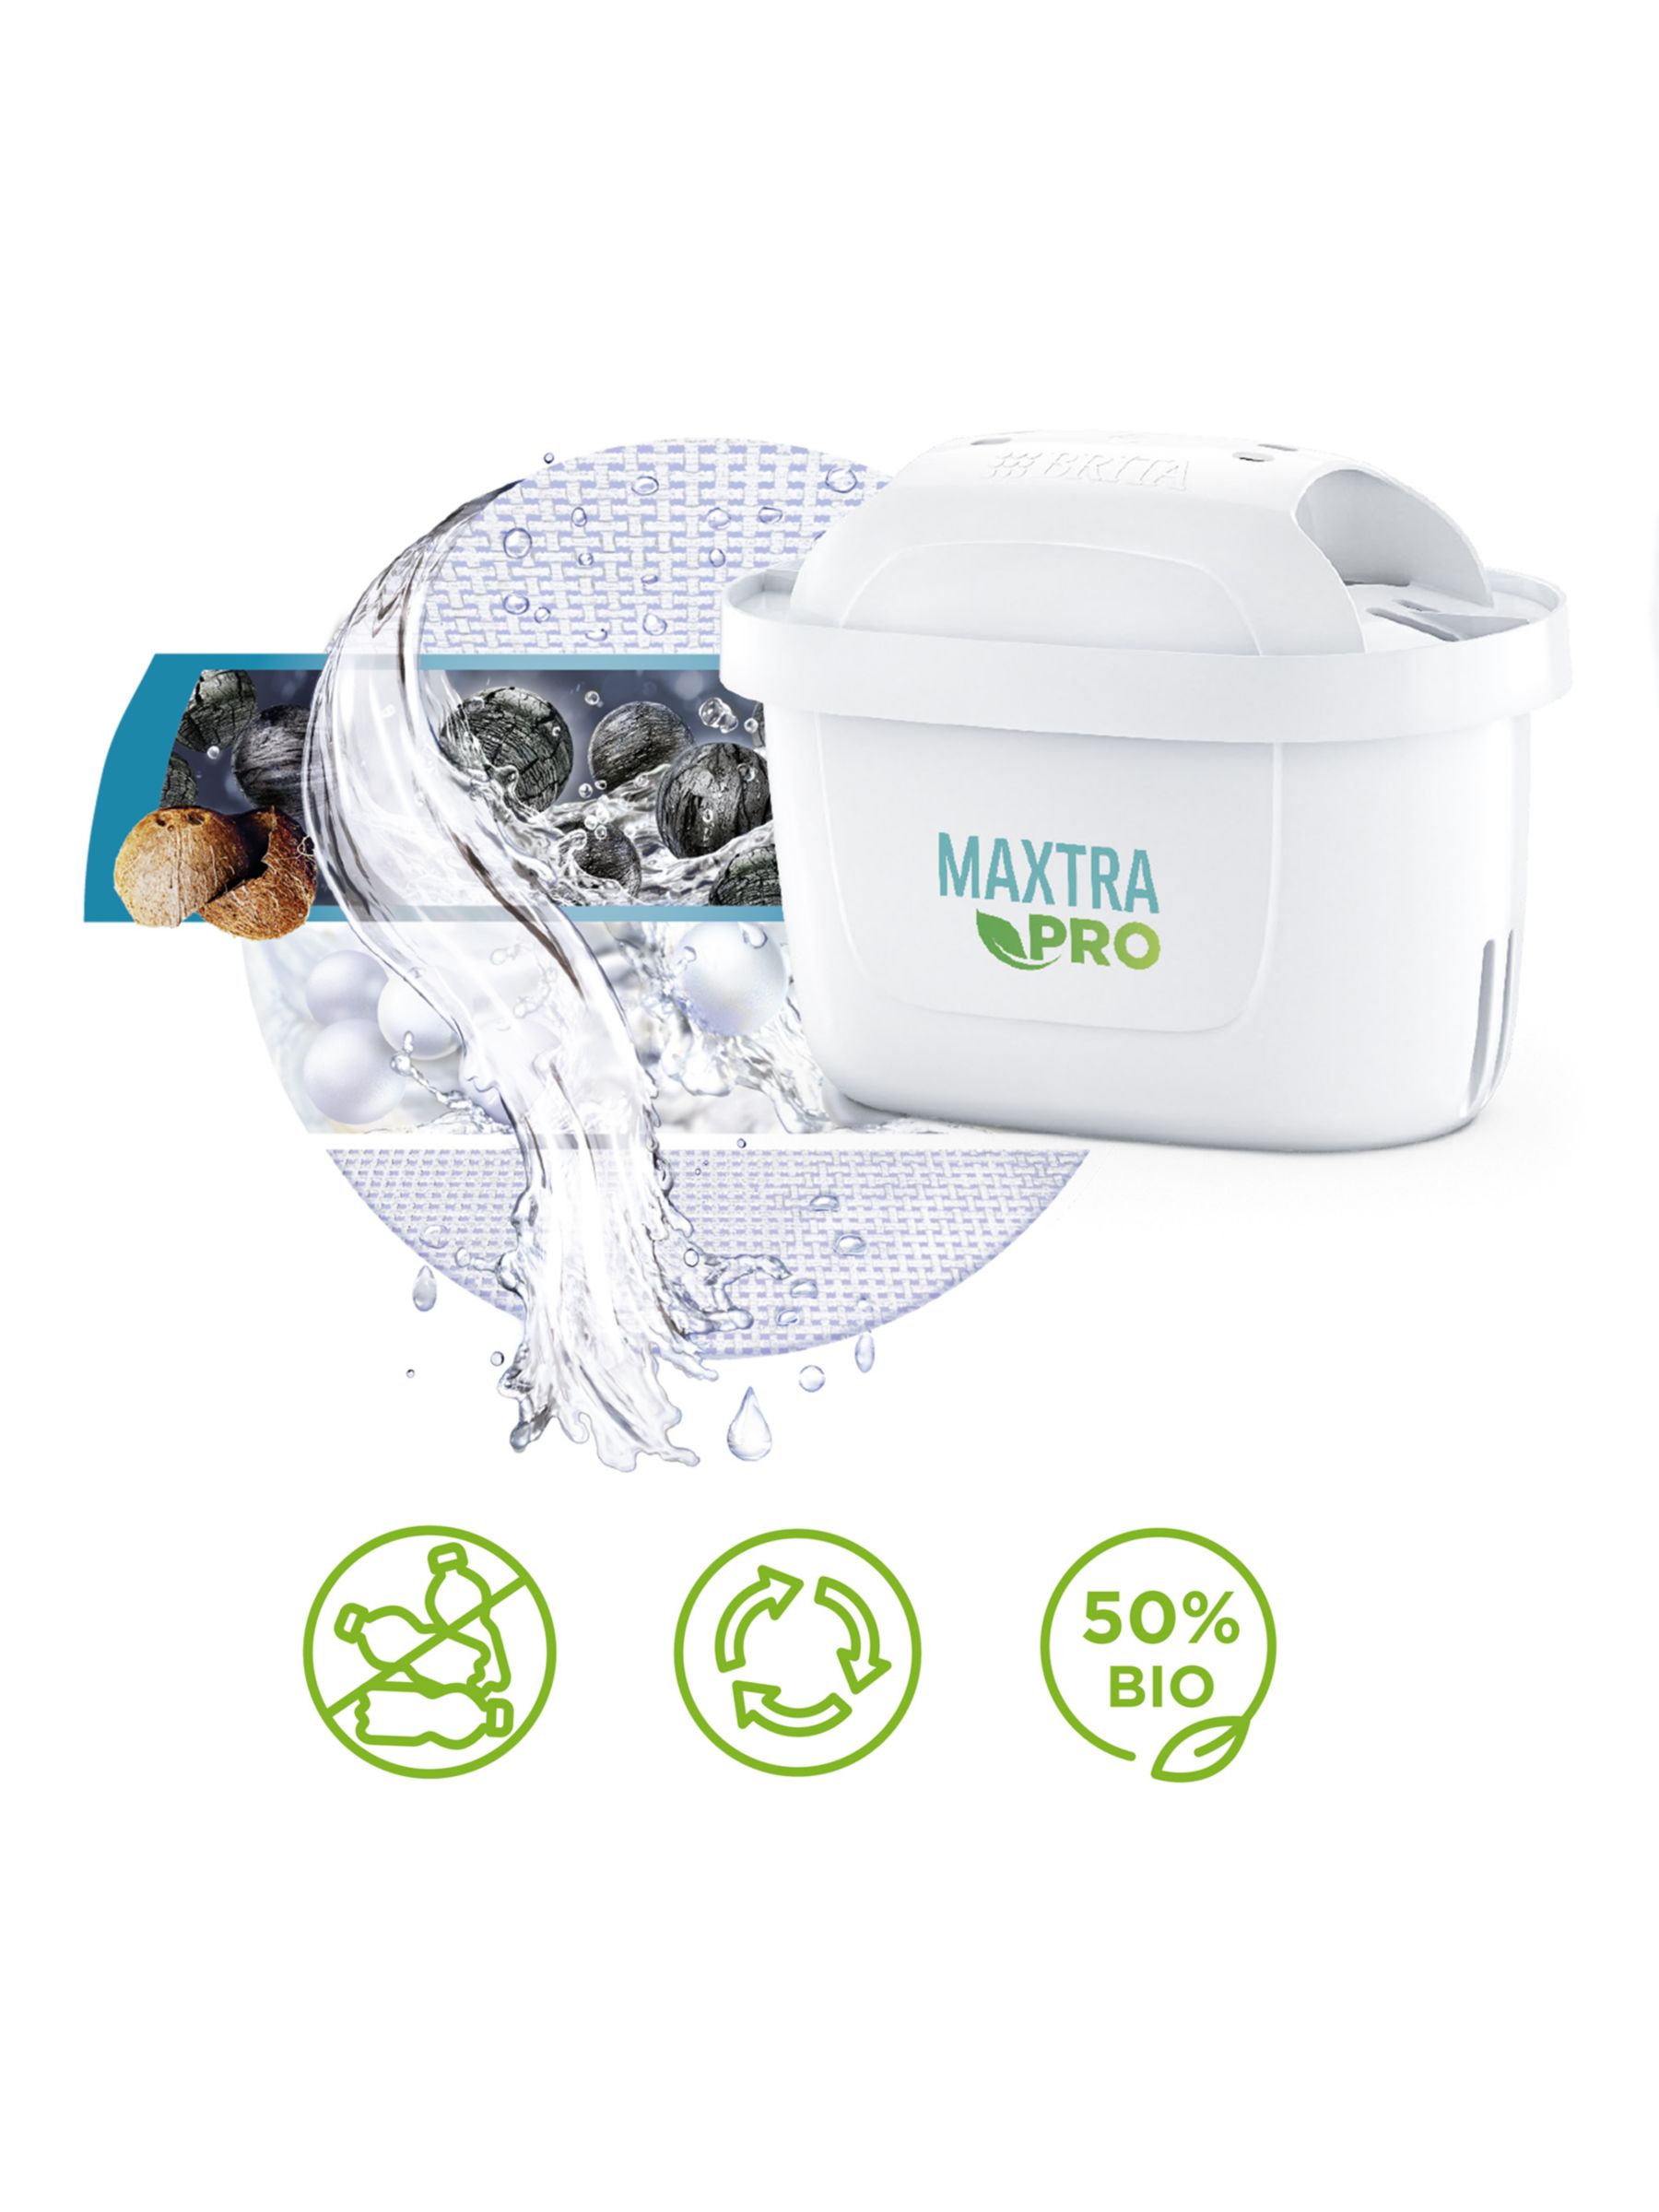 Brita Maxtra Pro All-in-1 Water Filter - 3 Pack